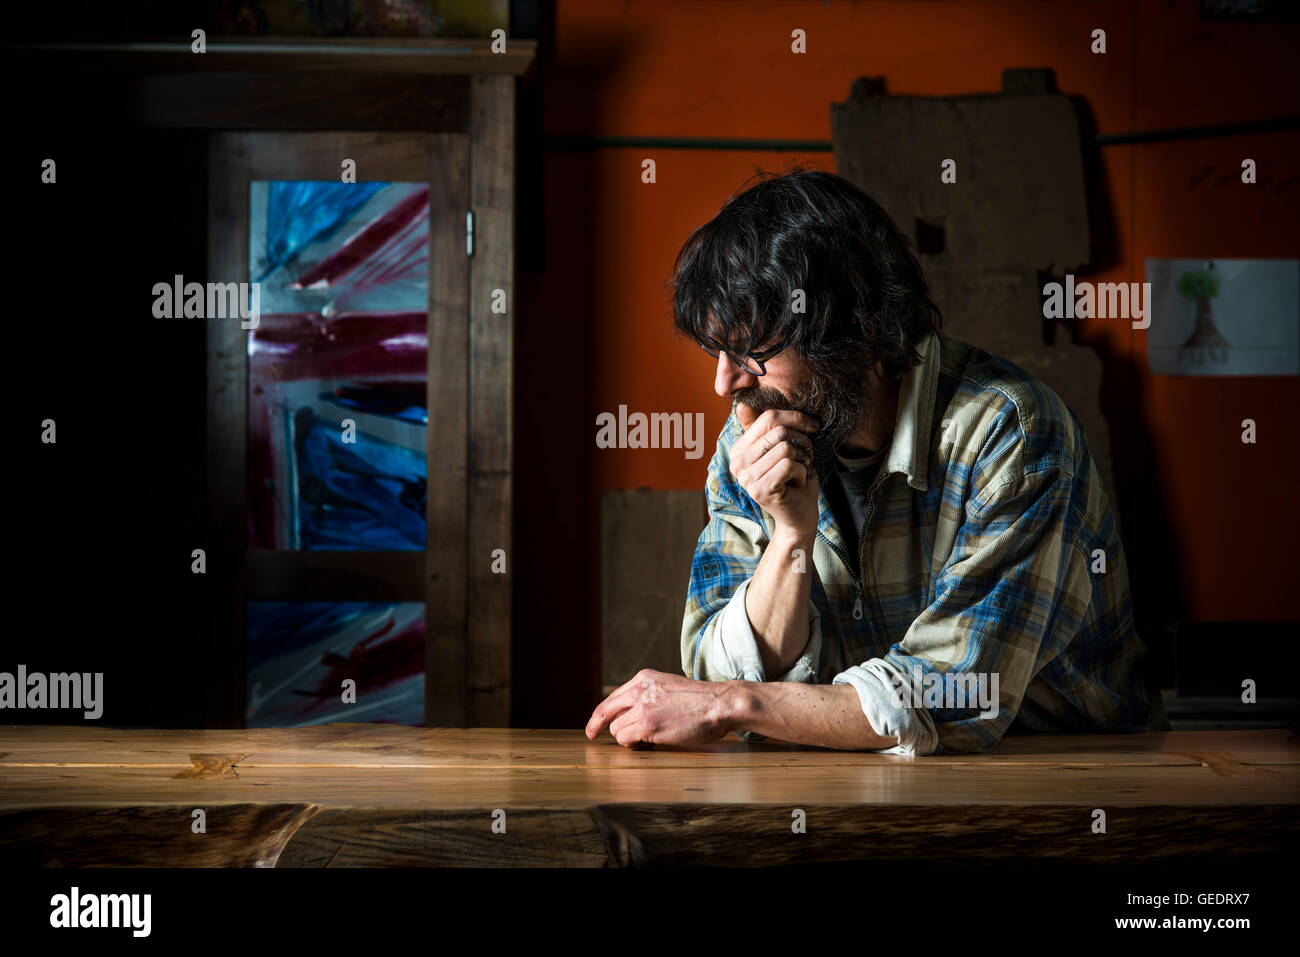 Contemplative Man Leaning on Table Stock Photo